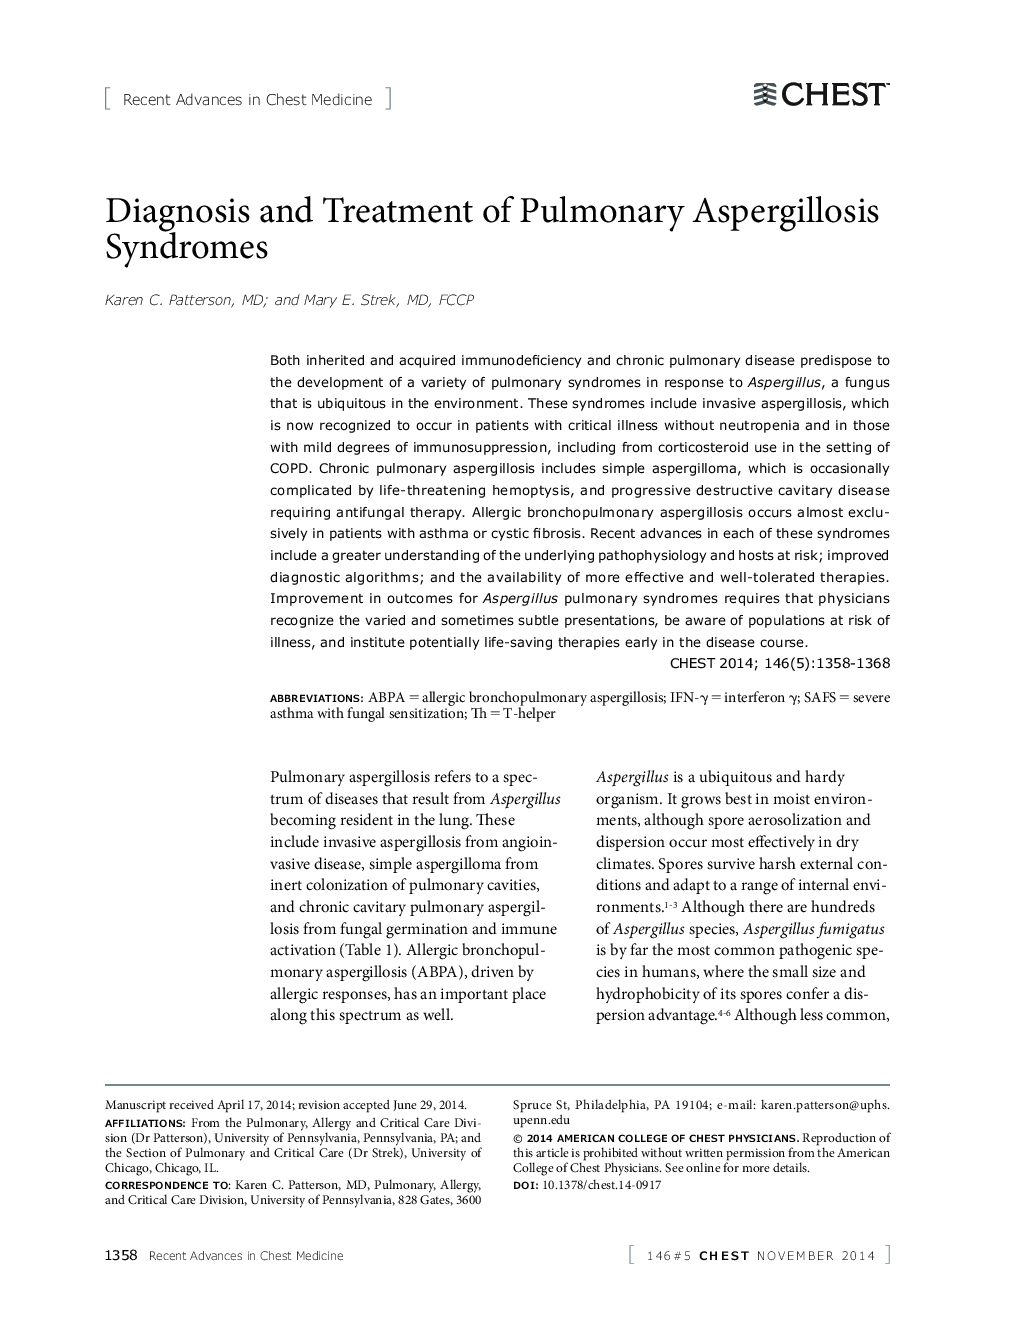 Diagnosis and Treatment of Pulmonary Aspergillosis Syndromes